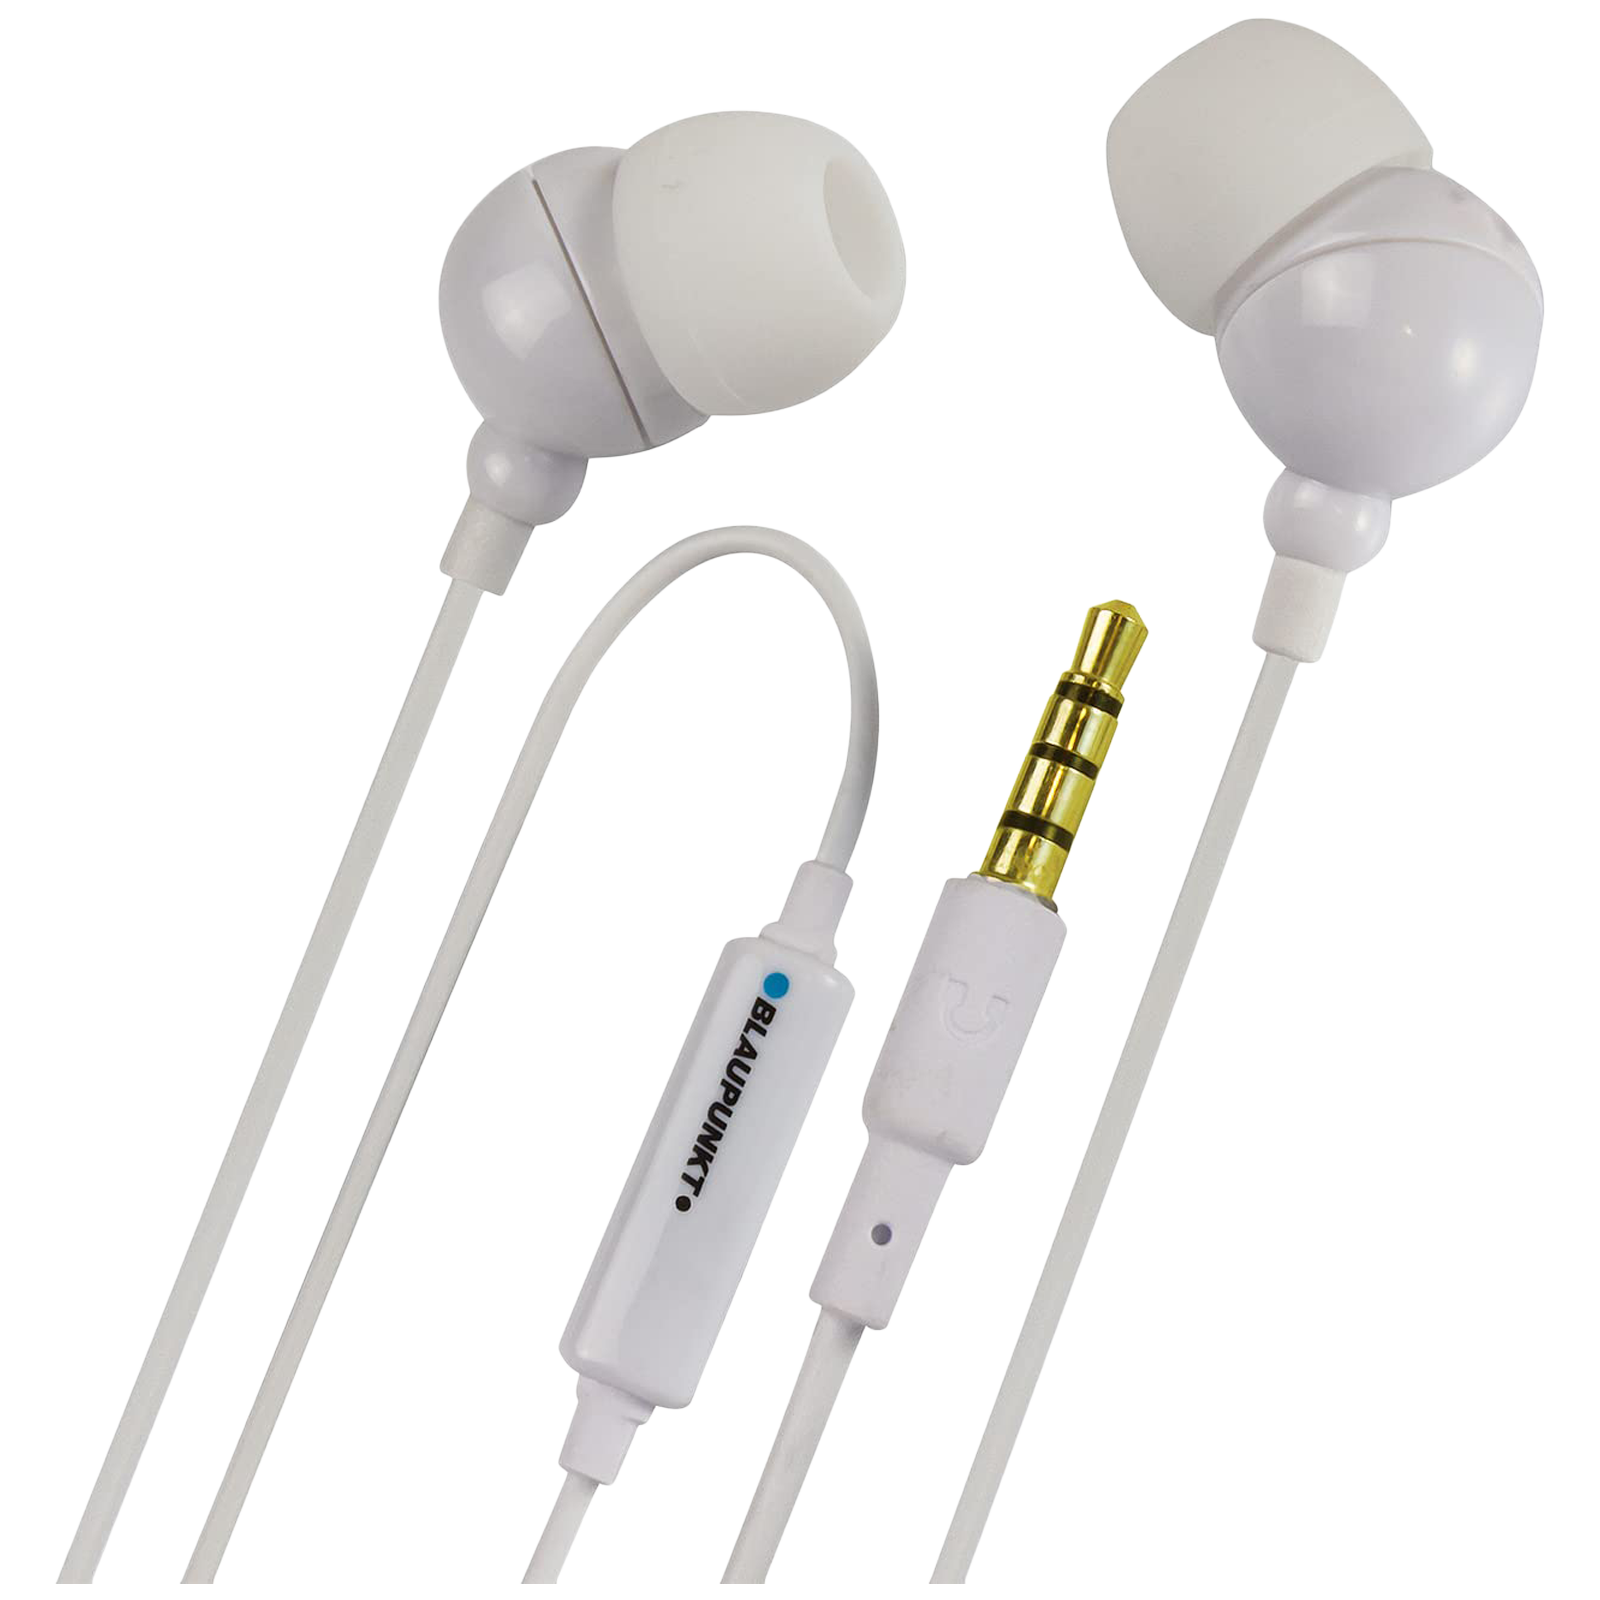 Blaupunkt EM-05M Wired Earphone with Mic (In Ear, White)